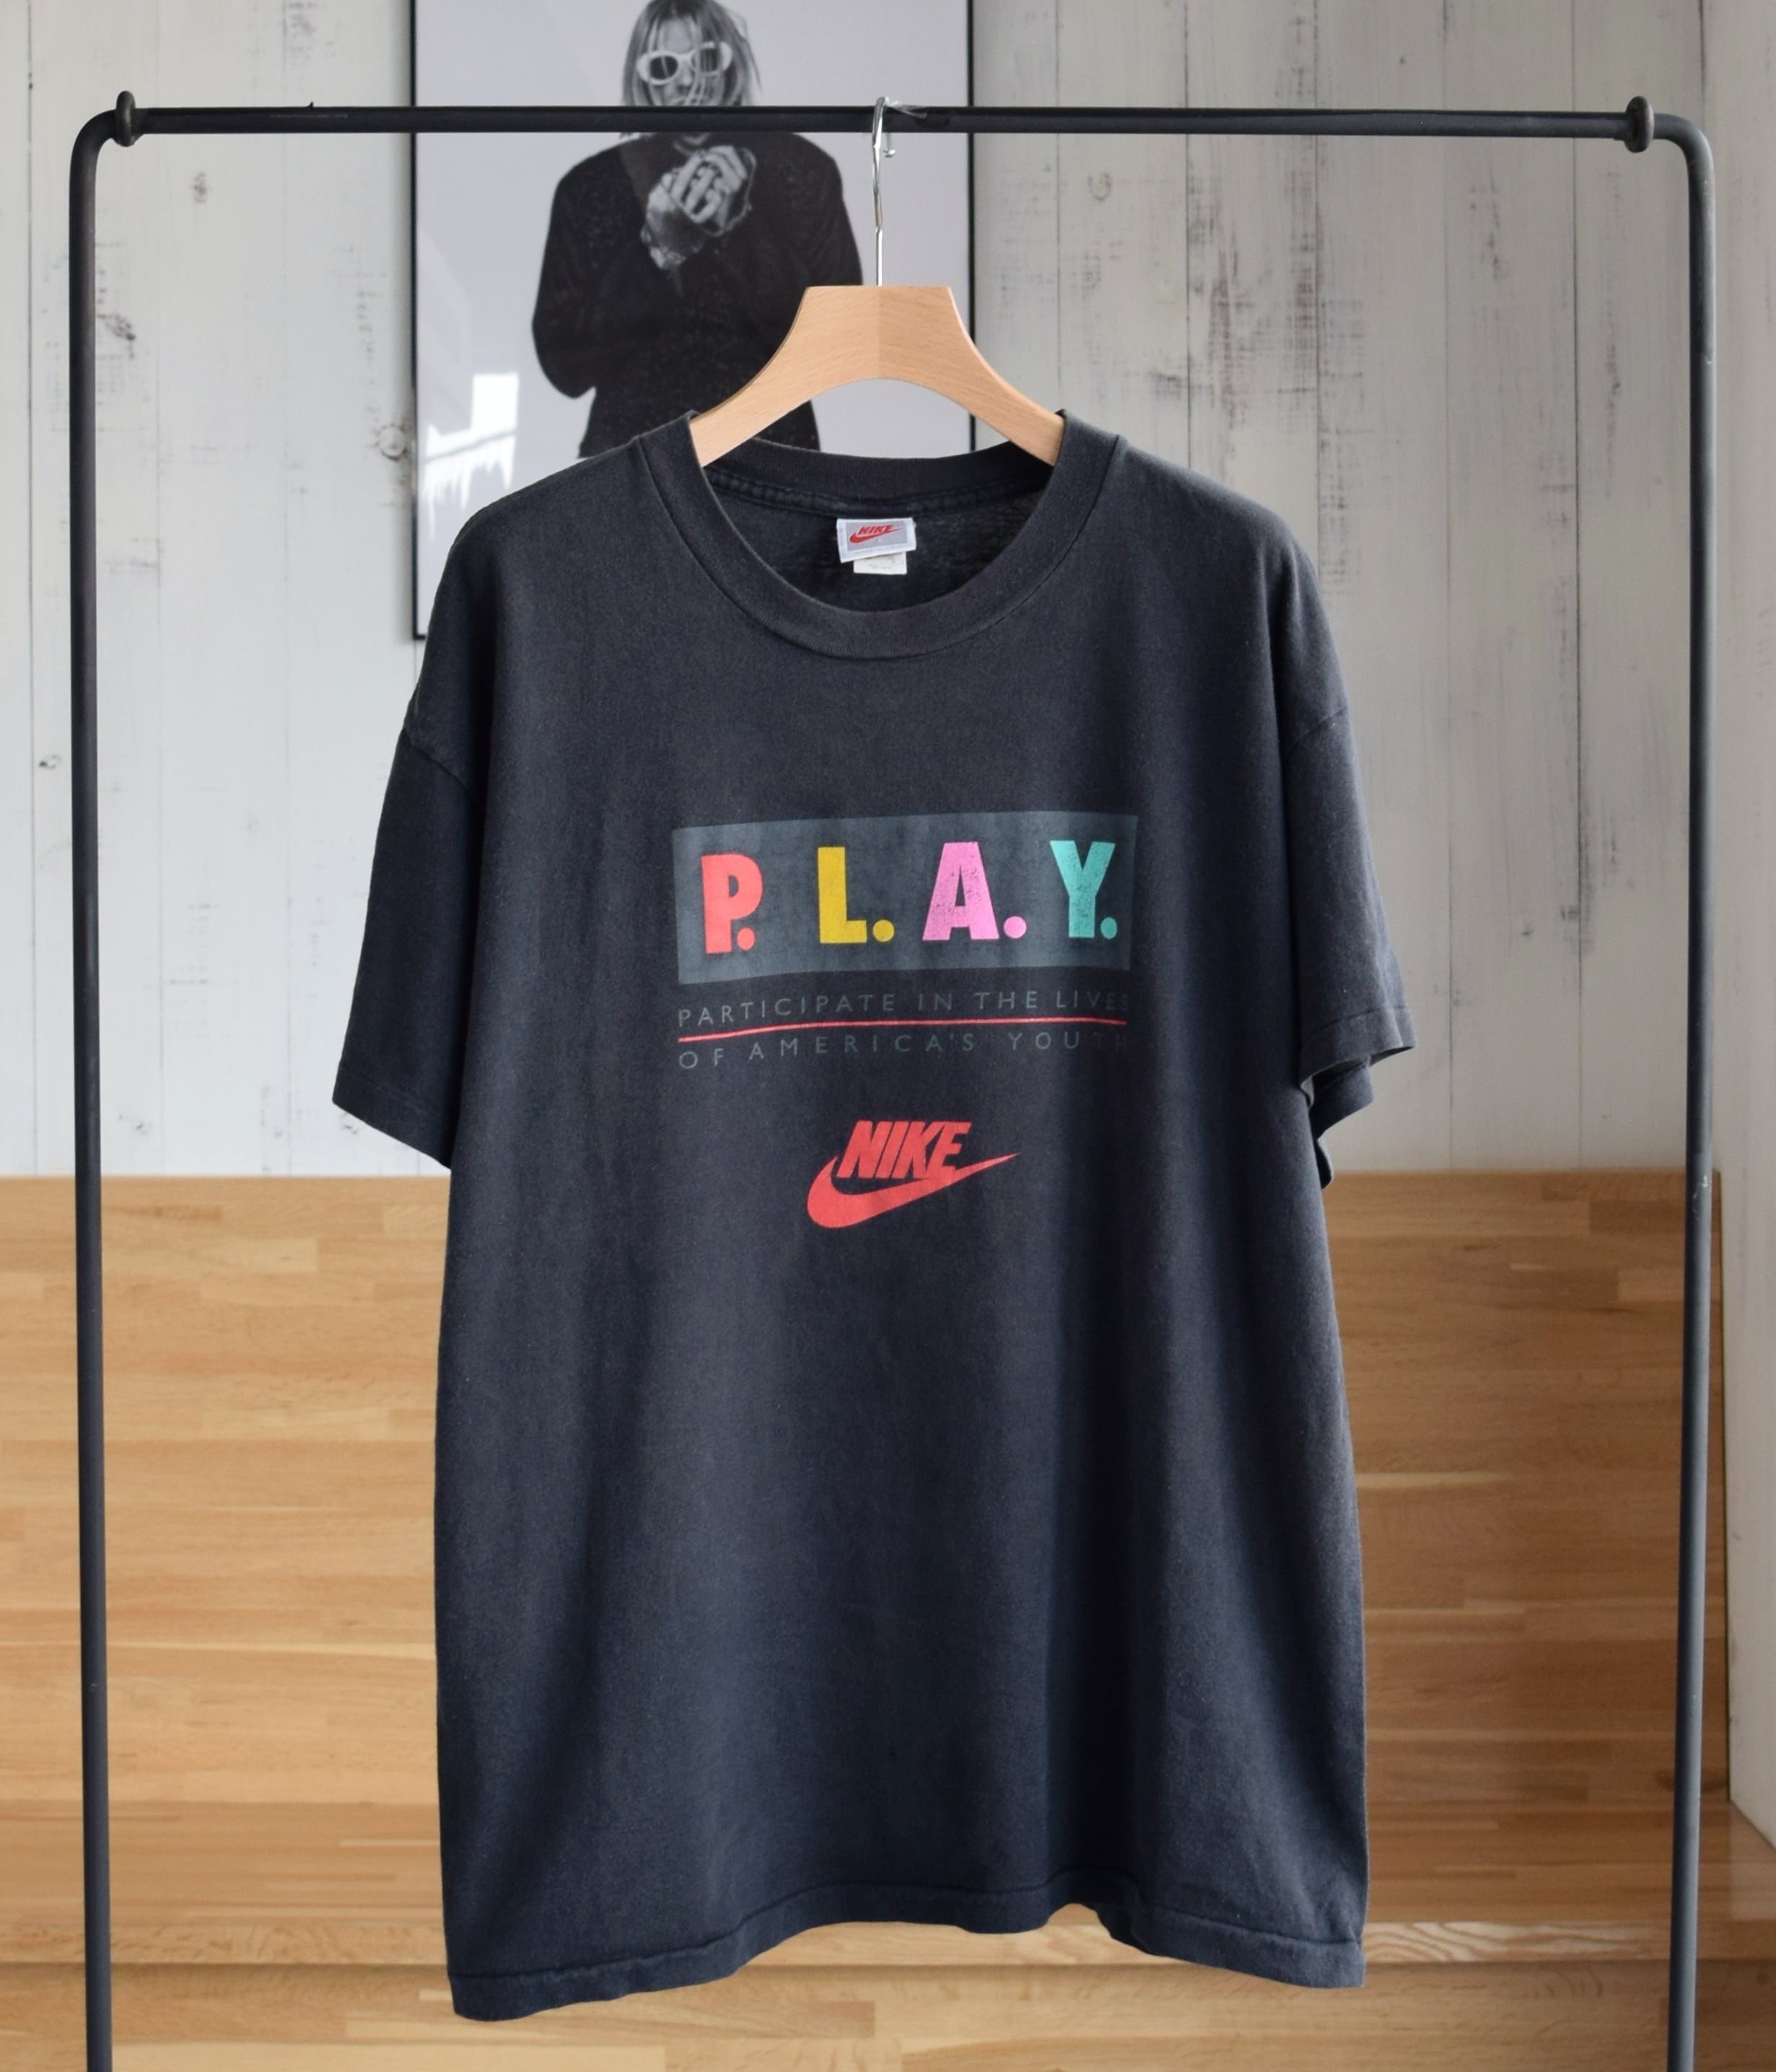 VINTAGE 90s NIKE T-shirt -P.L.A.Y.- | BEGGARS BANQUET